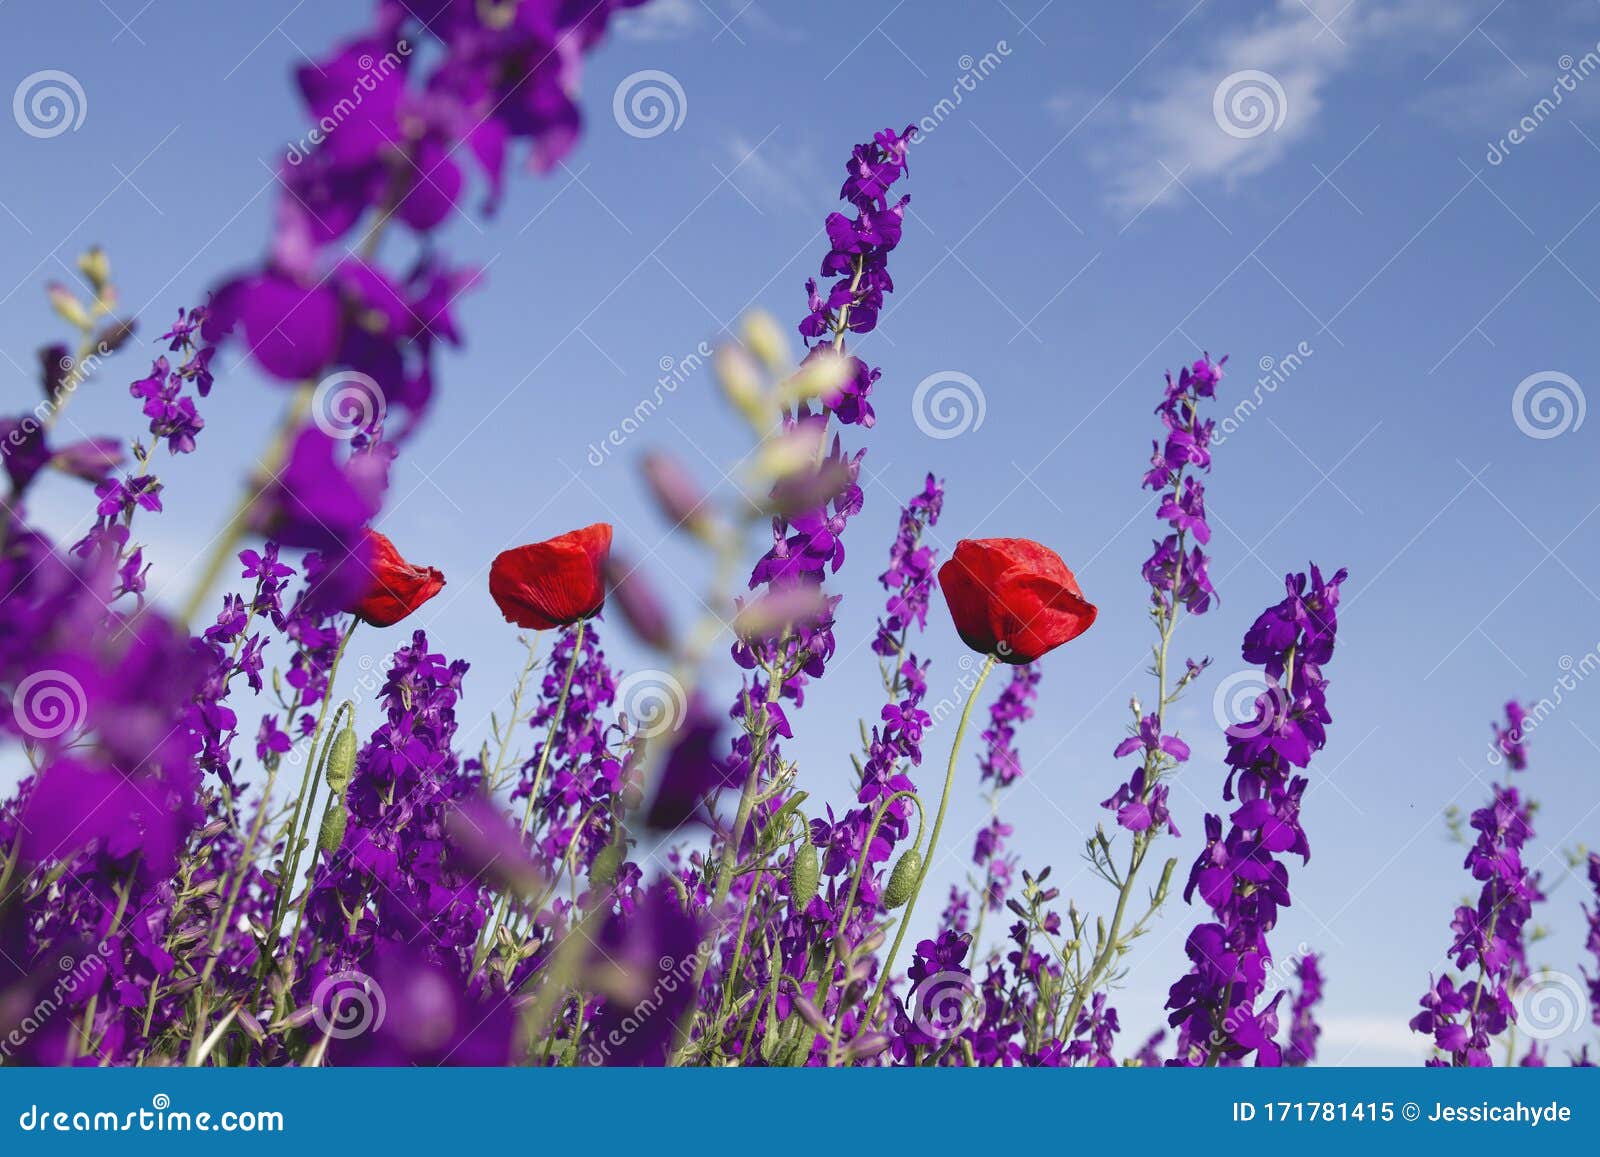 colorful wild flowers